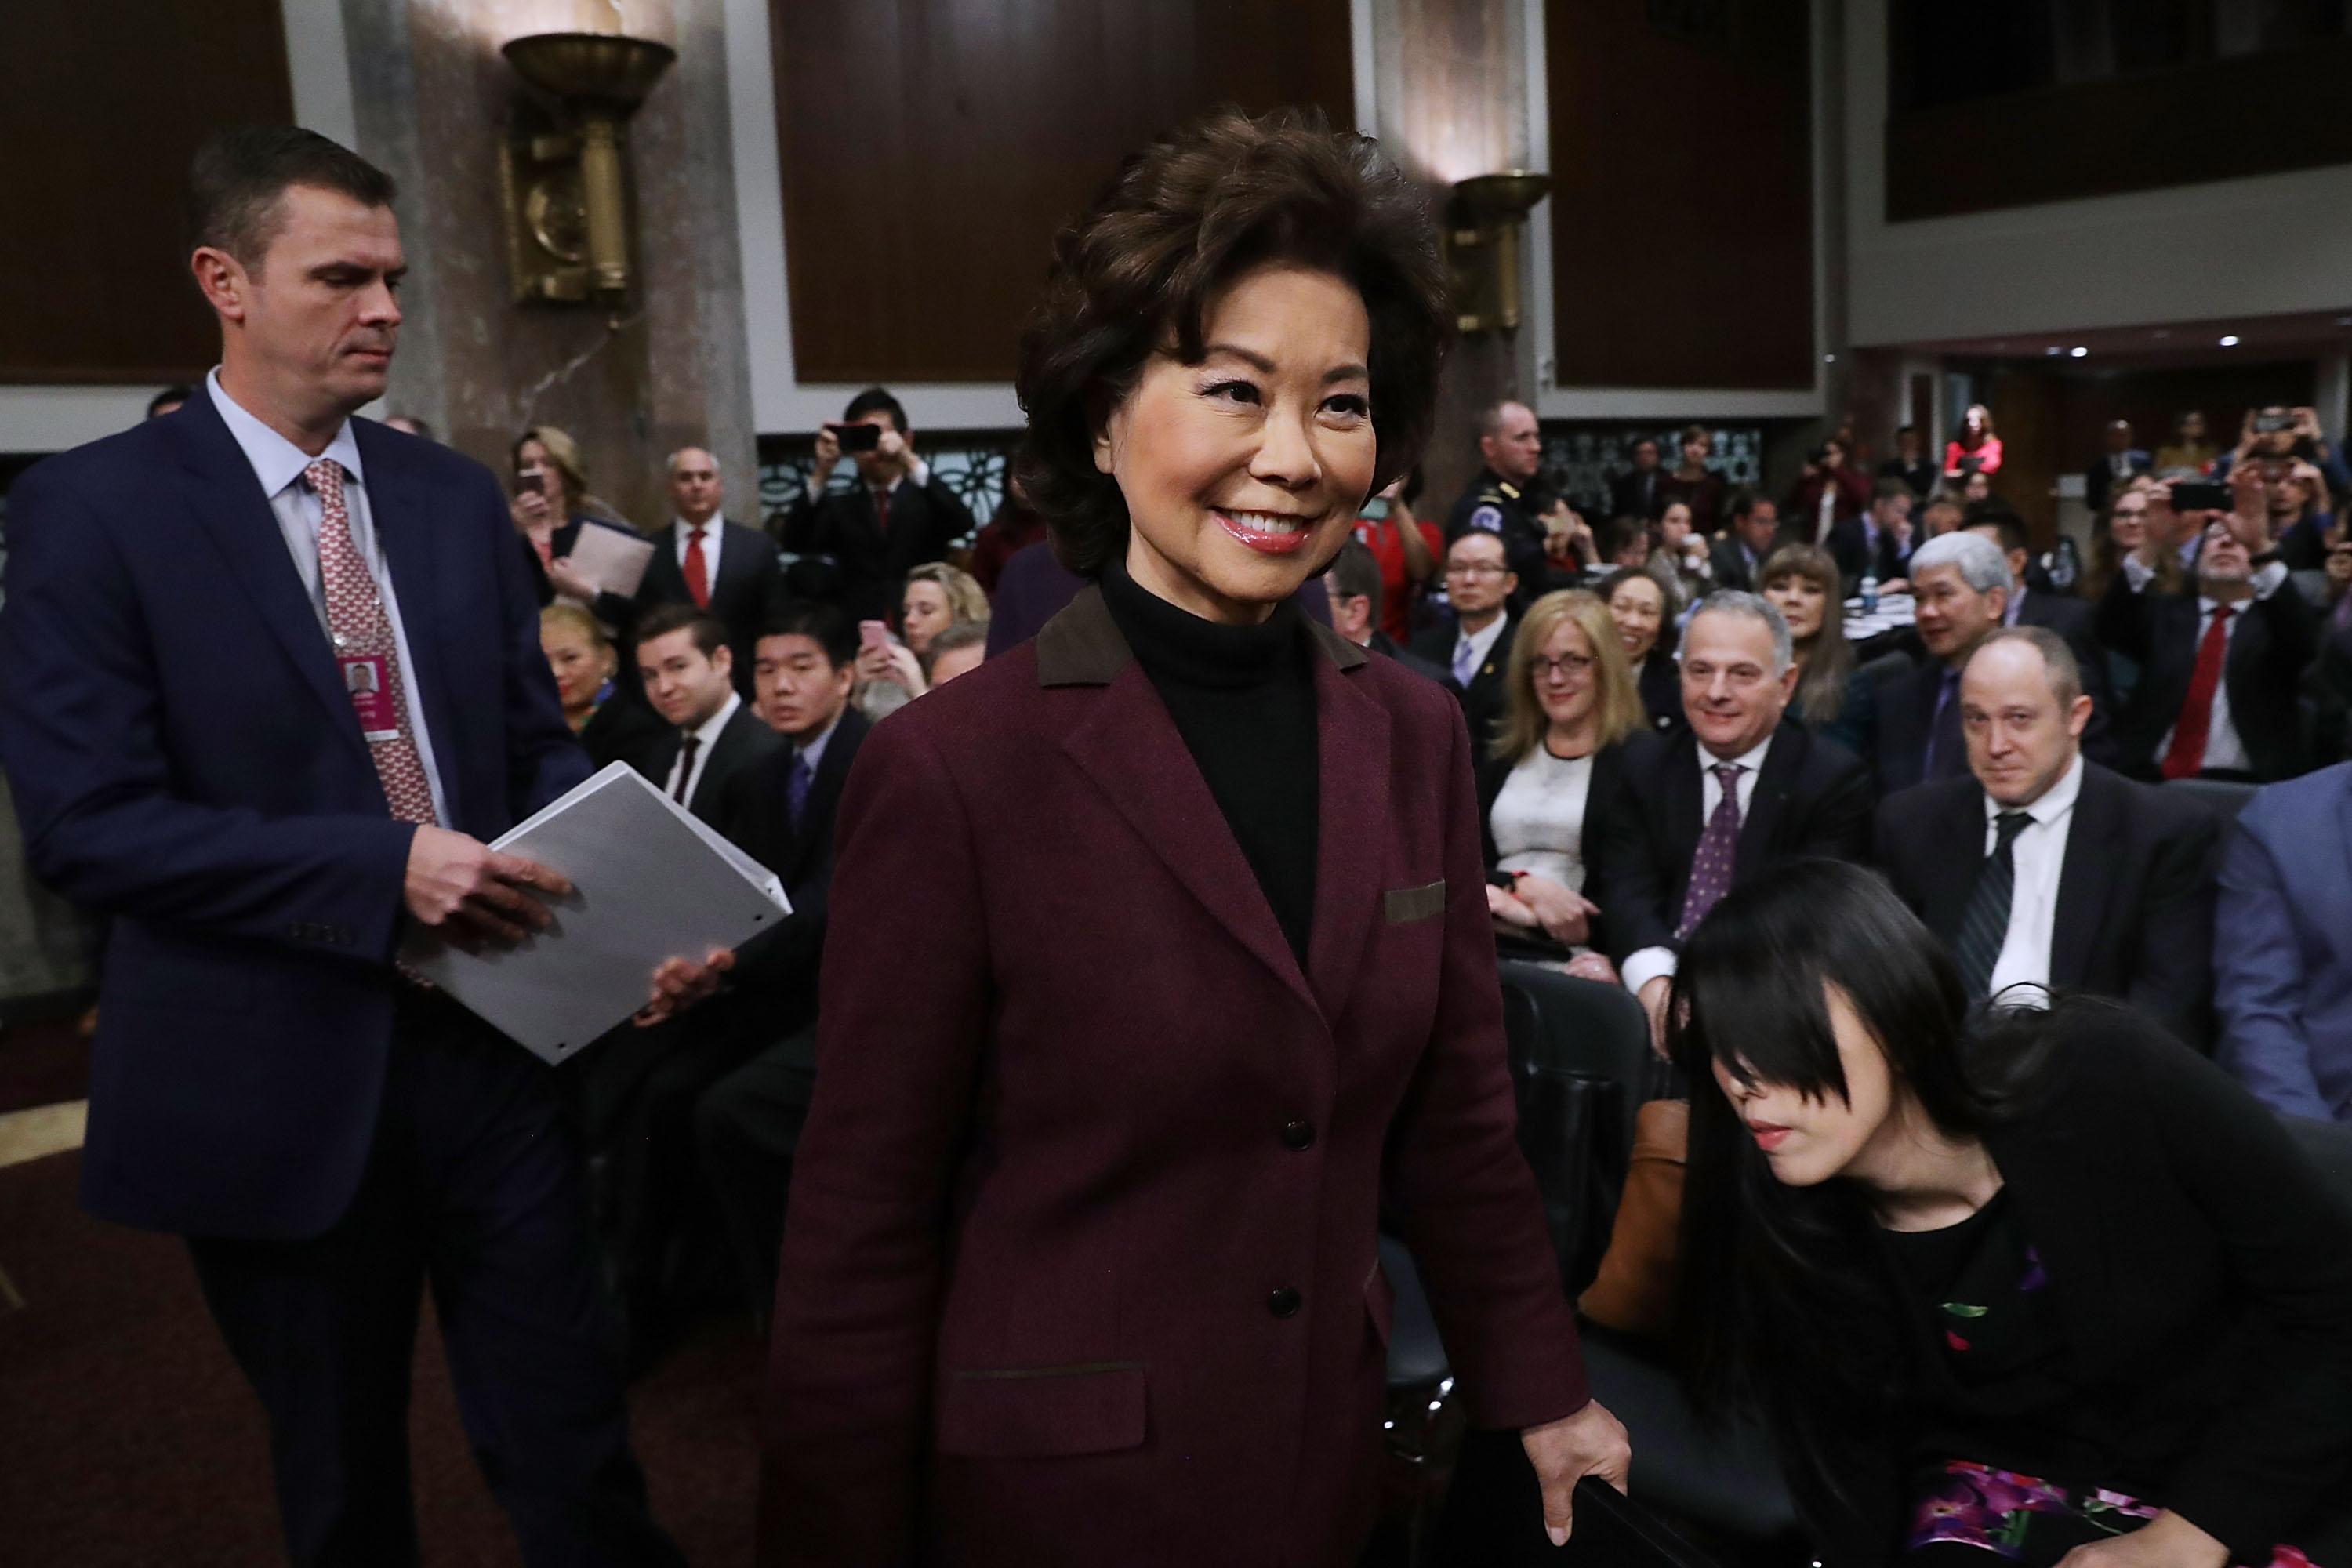 WASHINGTON, DC - JANUARY 11: Elaine Chao arrives for her confirmation hearing to be the next U.S. secretary of transportation before the Senate Commerce, Science and Transportation Committee in the Dirksen Senate Office Building on Capitol Hill January 11, 2017 in Washington, DC. The wife of Senate Majority Leader Mitch McConnell (R-KY), Chao, who has previously served as secretary of the Labor Department, was nominated by President-elect Donald Trump. (Photo by Chip Somodevilla/Getty Images)